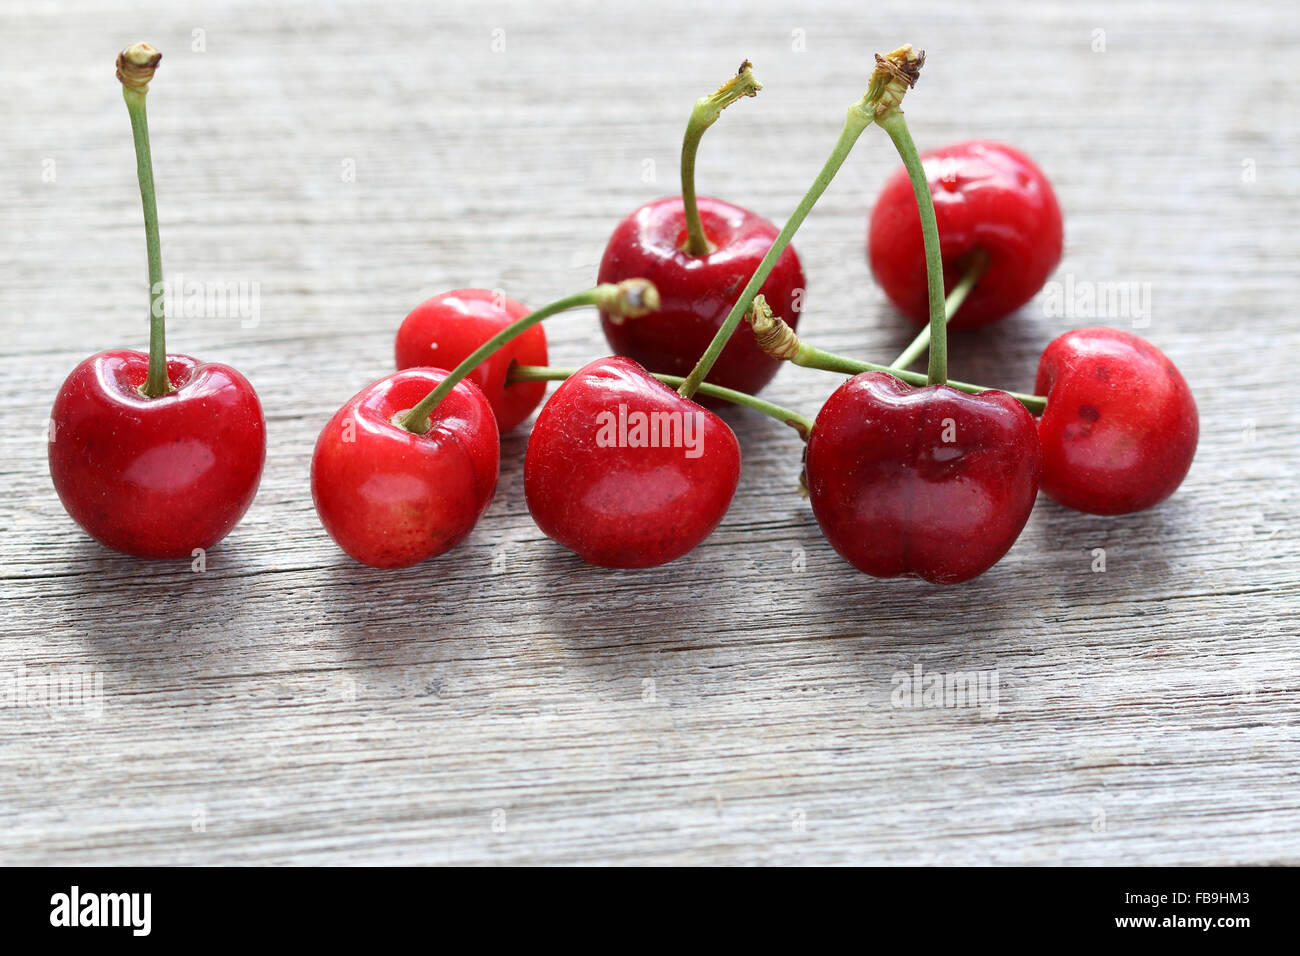 Close up of Prunus avium cherries or known as Lapin cherries on wooden board Stock Photo